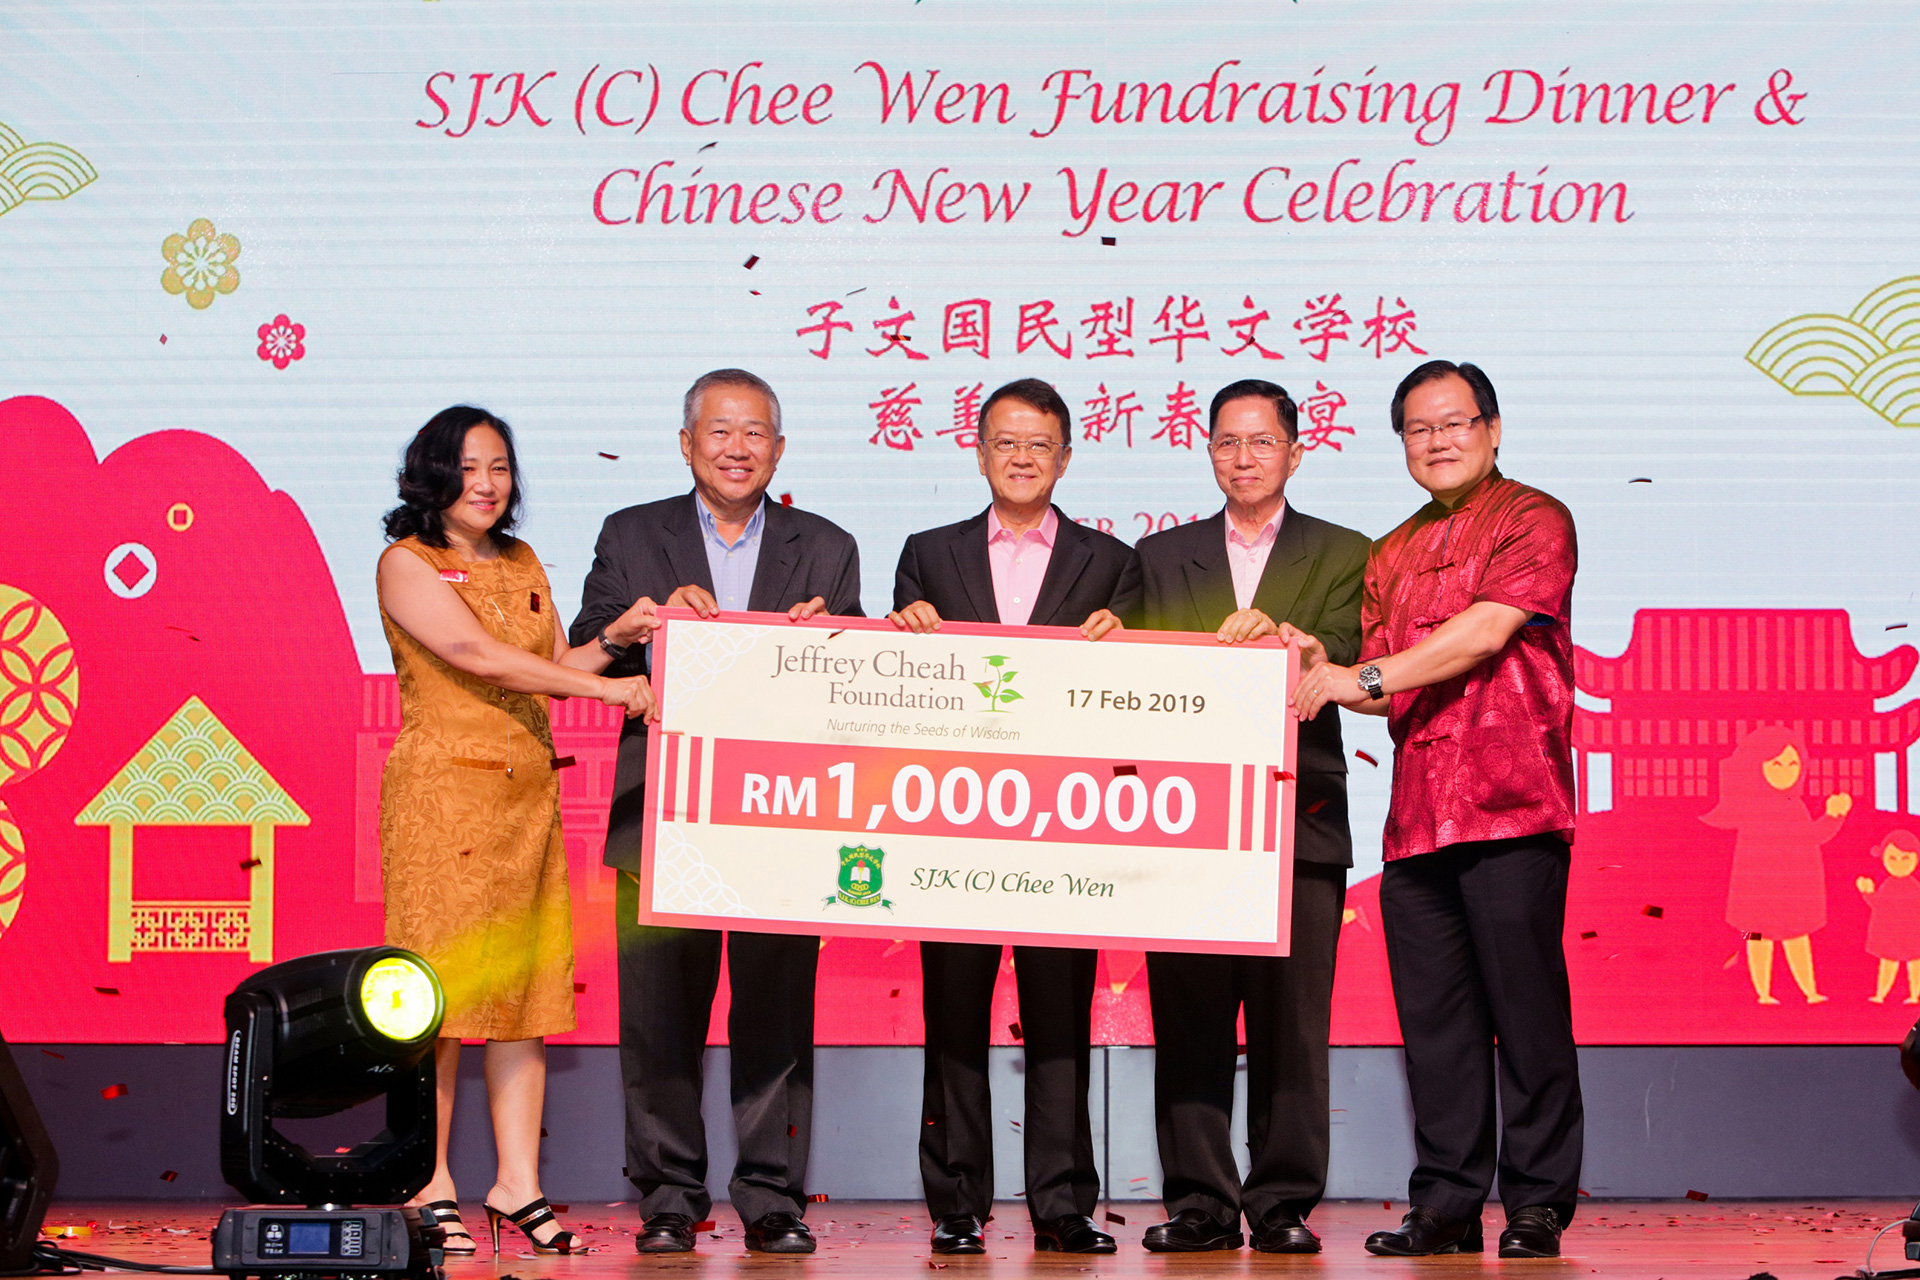 Jeffrey Cheah Foundation Raises RM1 Mil for the Restoration Work and Enhancement of SJK(C) Chee Wen